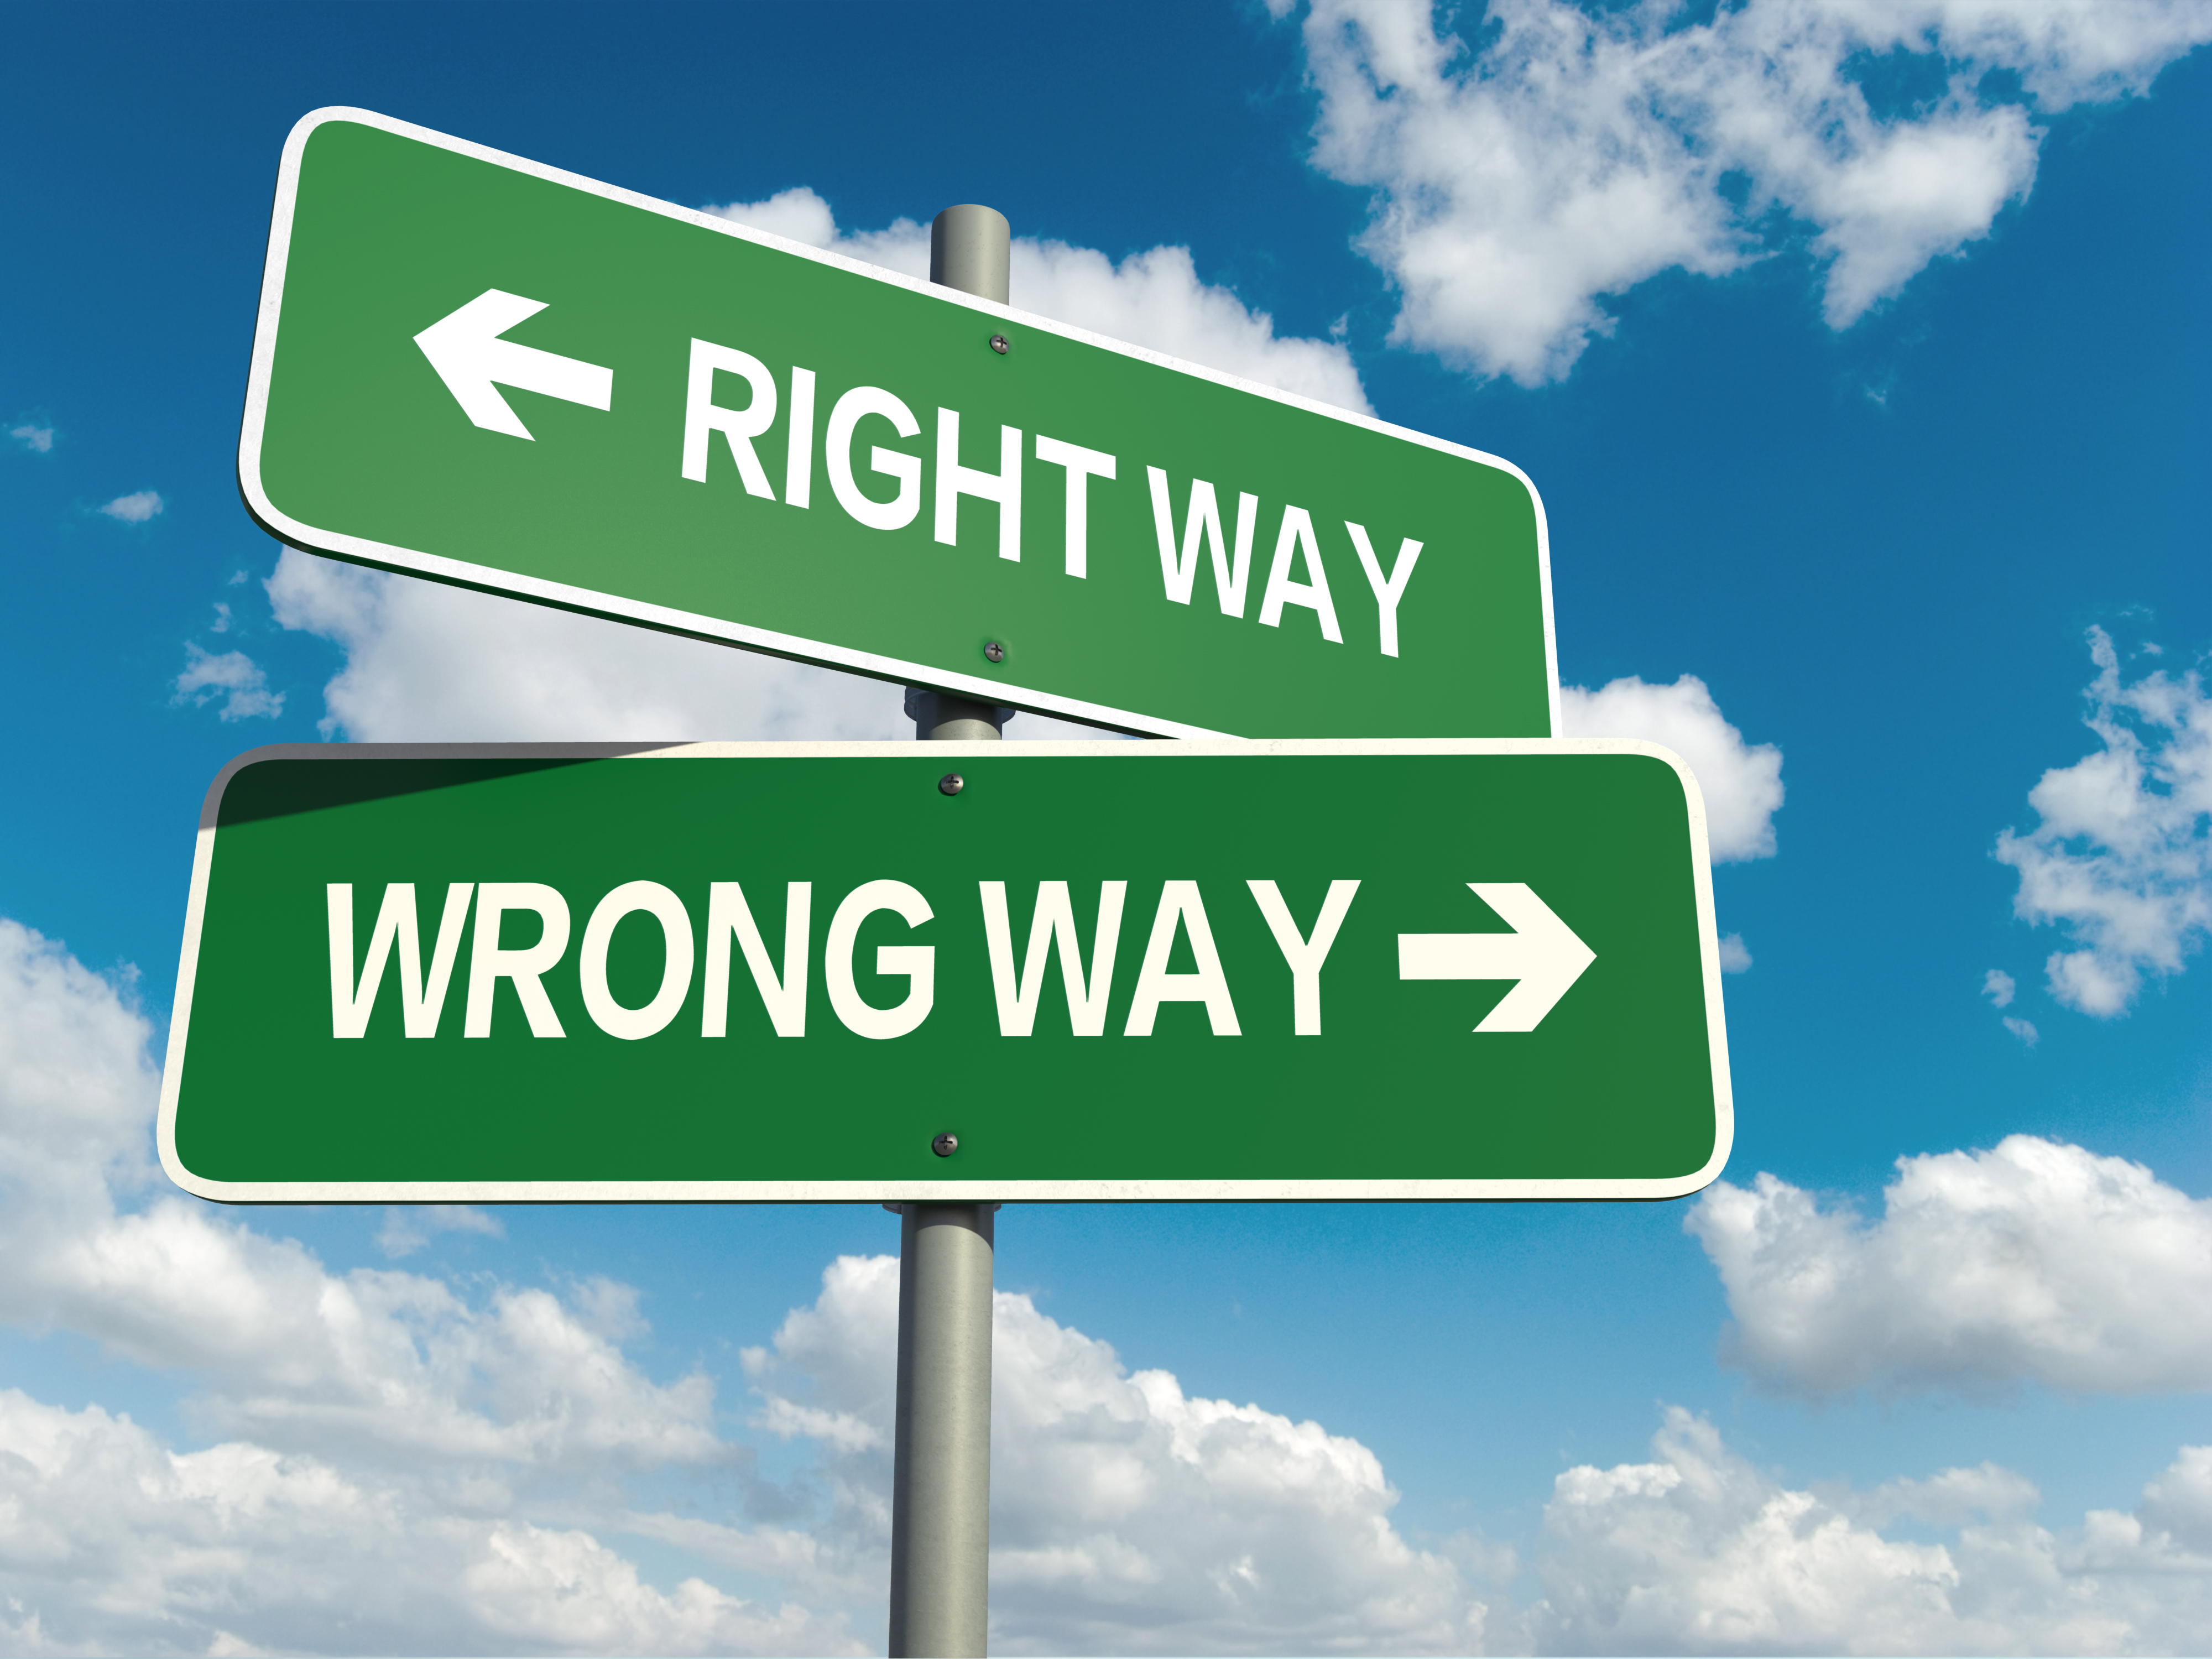 Wrong and Right way signs used for editorial purposes only